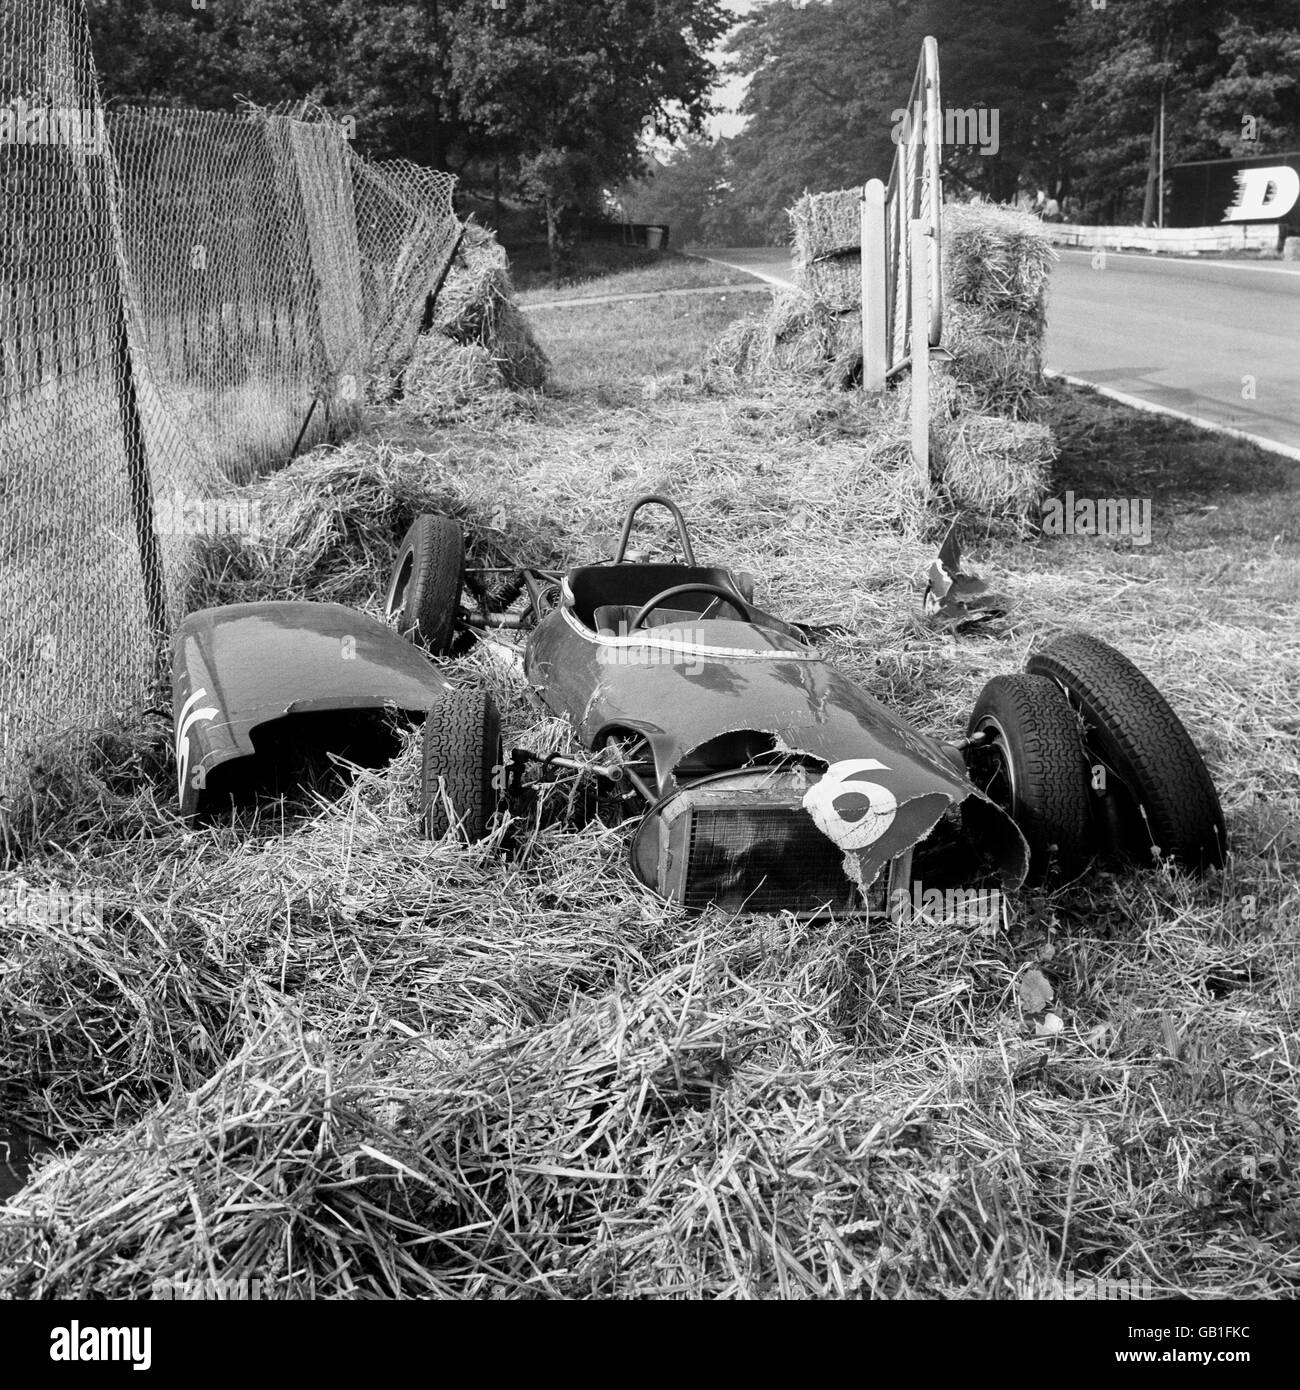 A Lotus-Ford, driven by Alan Rees, lies torn and battered beside the racing circuit at South London's Crystal Palace. The driver was unhurt. He was taking part in the September Trophy race for Formula Junior cars, organised by the British Automobile Racing Club. Stock Photo